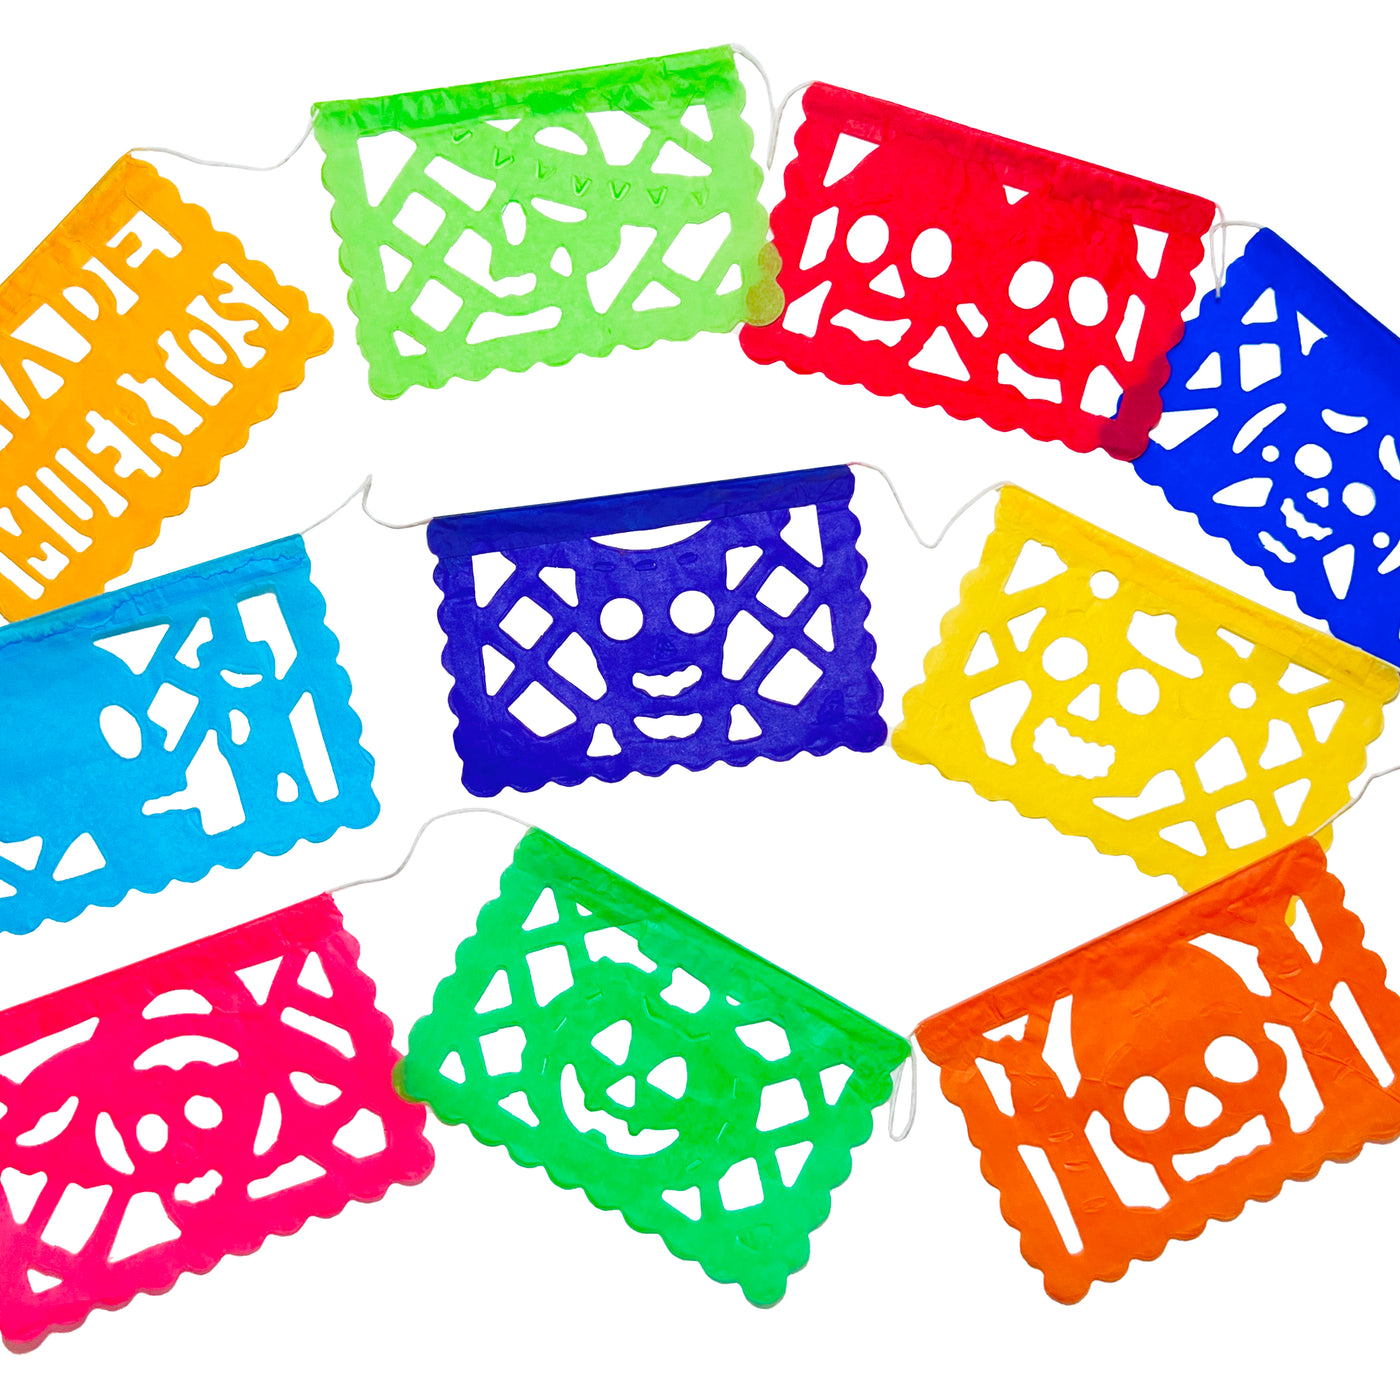 multicolor papel picado tissue paper flags attached to a white string with various designs including but not limited to skulls, jack-o-lanterns, candles, and phrases like "Dia de Muertos"